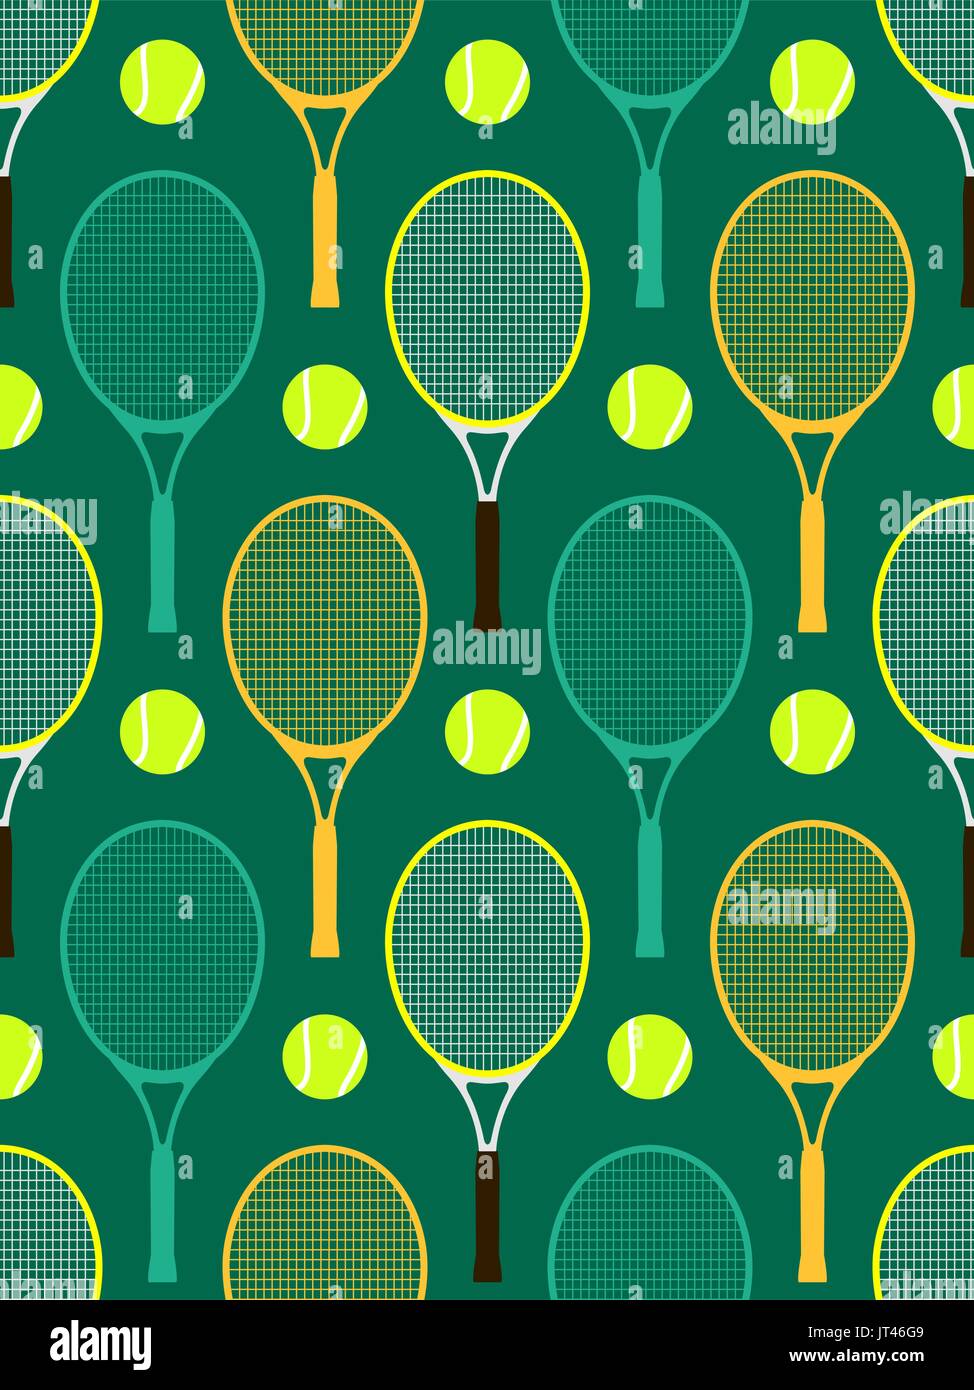 Seamless pattern with tennis rackets and balls.Vector illustration. Stock Vector